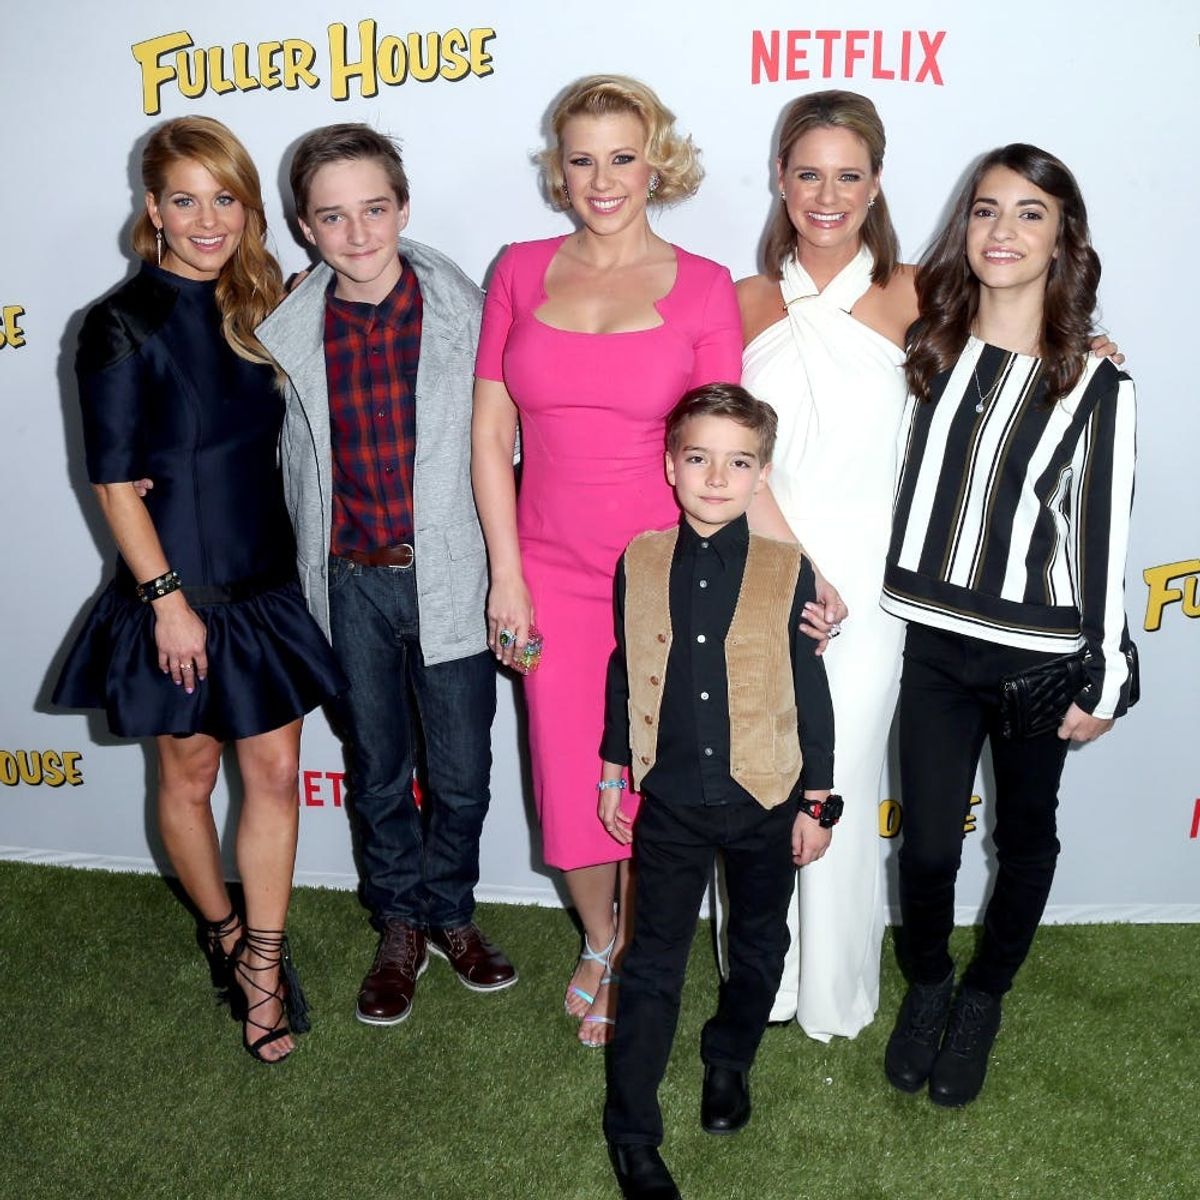 The Fuller House Season Three Premiere Date Marks a Super Special Occasion